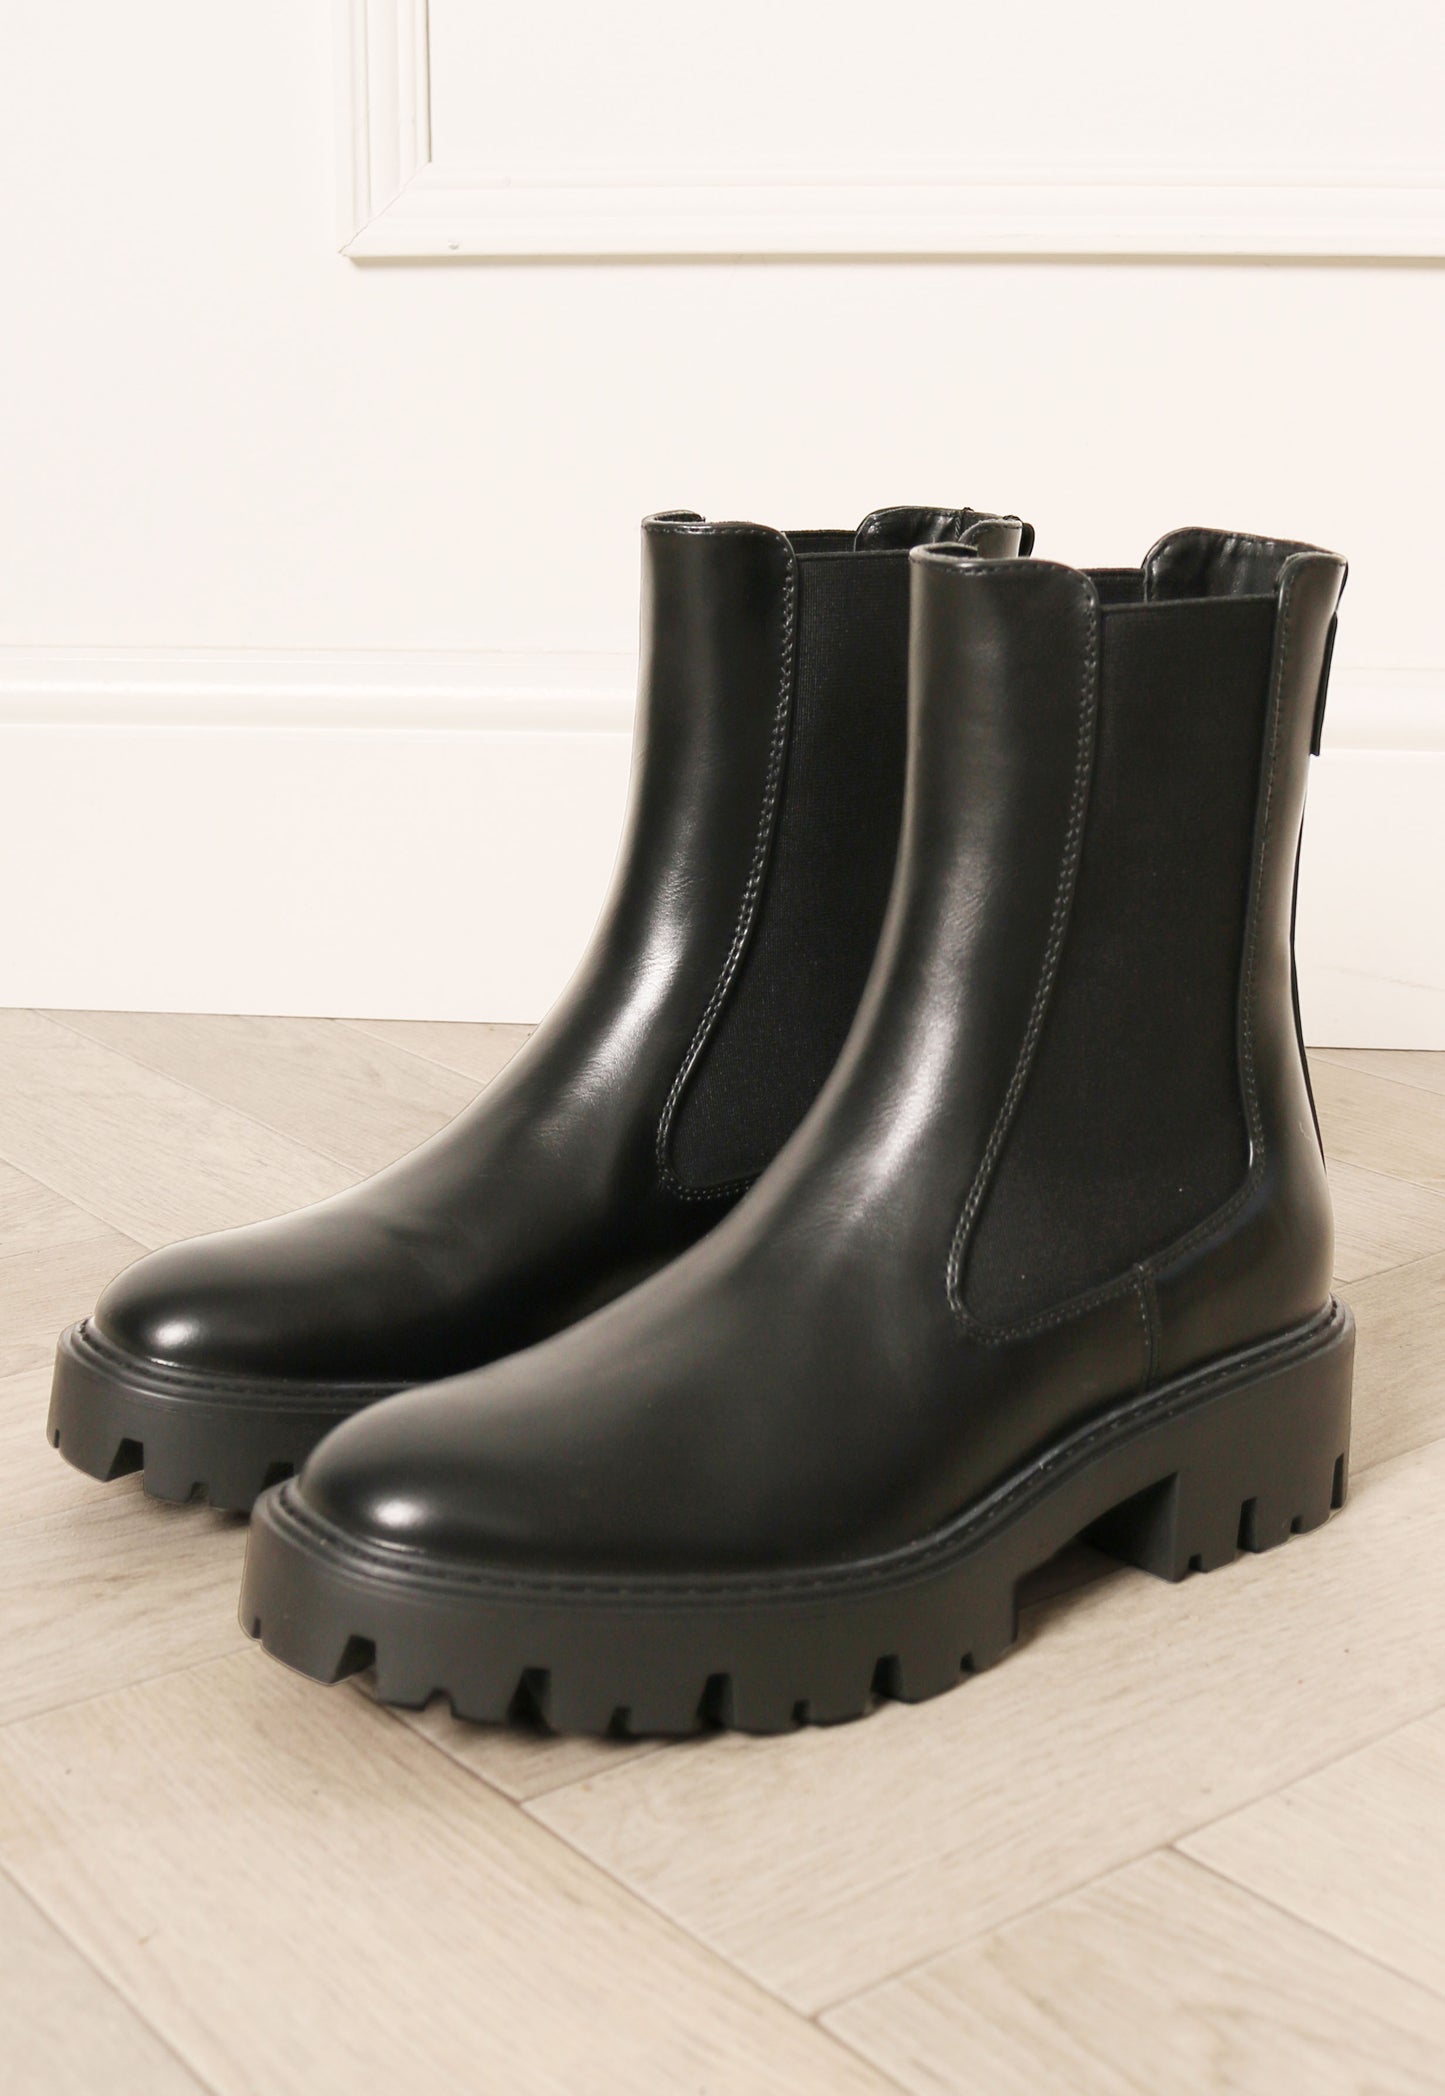 ONLY Chunky Chelsea Boots in Black - concretebartops